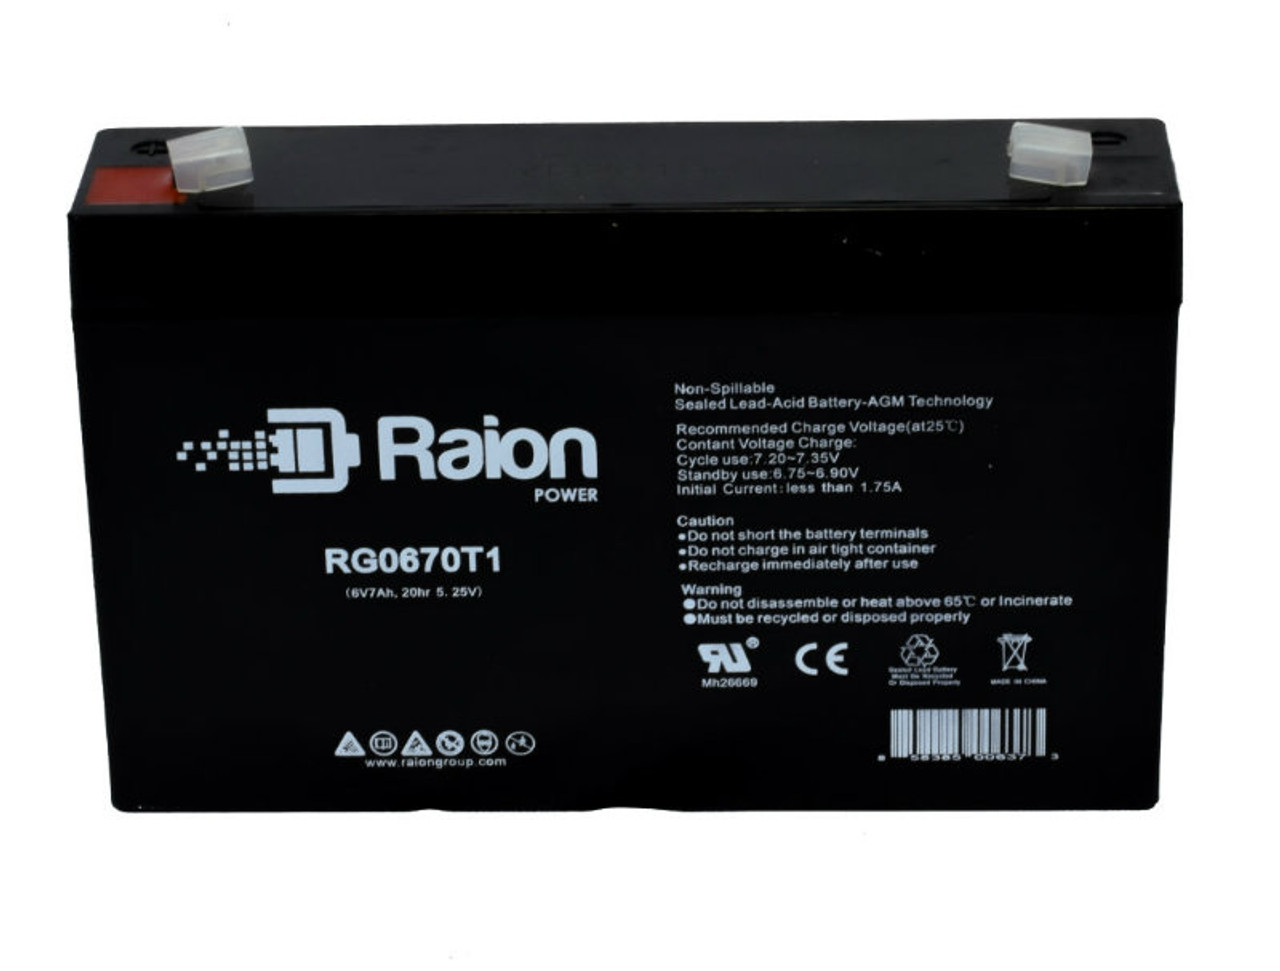 Raion Power RG0670T1 Replacement Battery Cartridge for Kid Motorz 1218 Motorcycle Pink